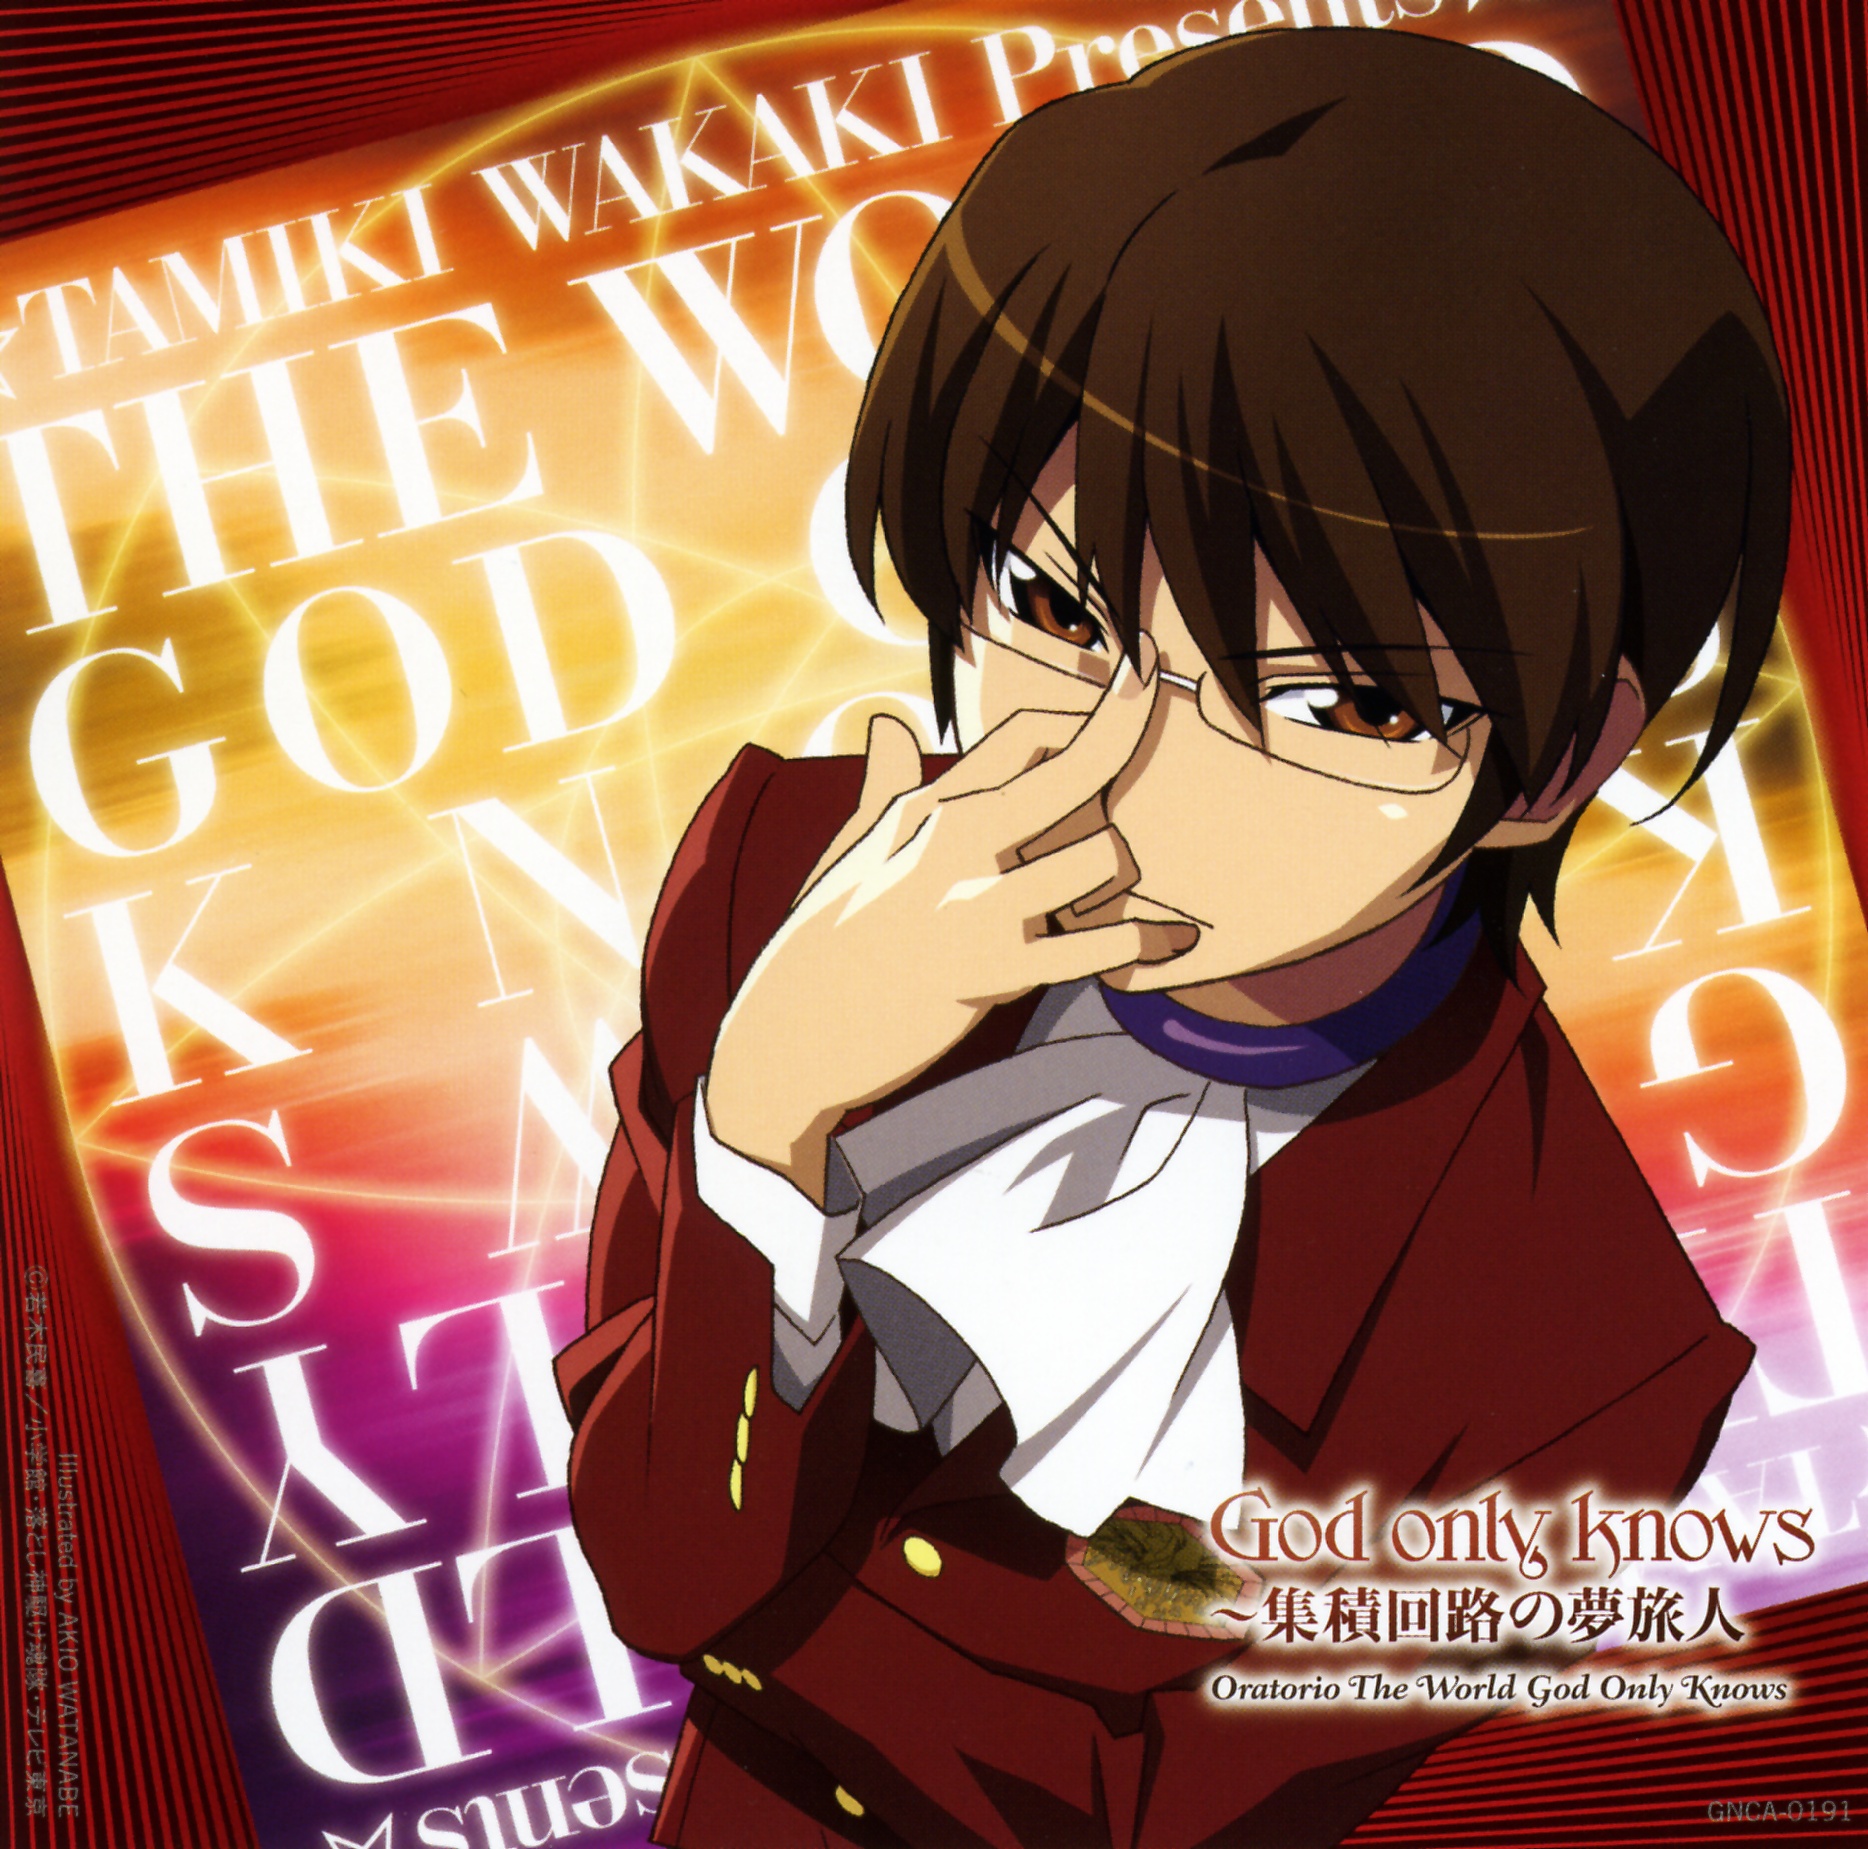 Apollo  The World God Only Knows Wiki  Fandom